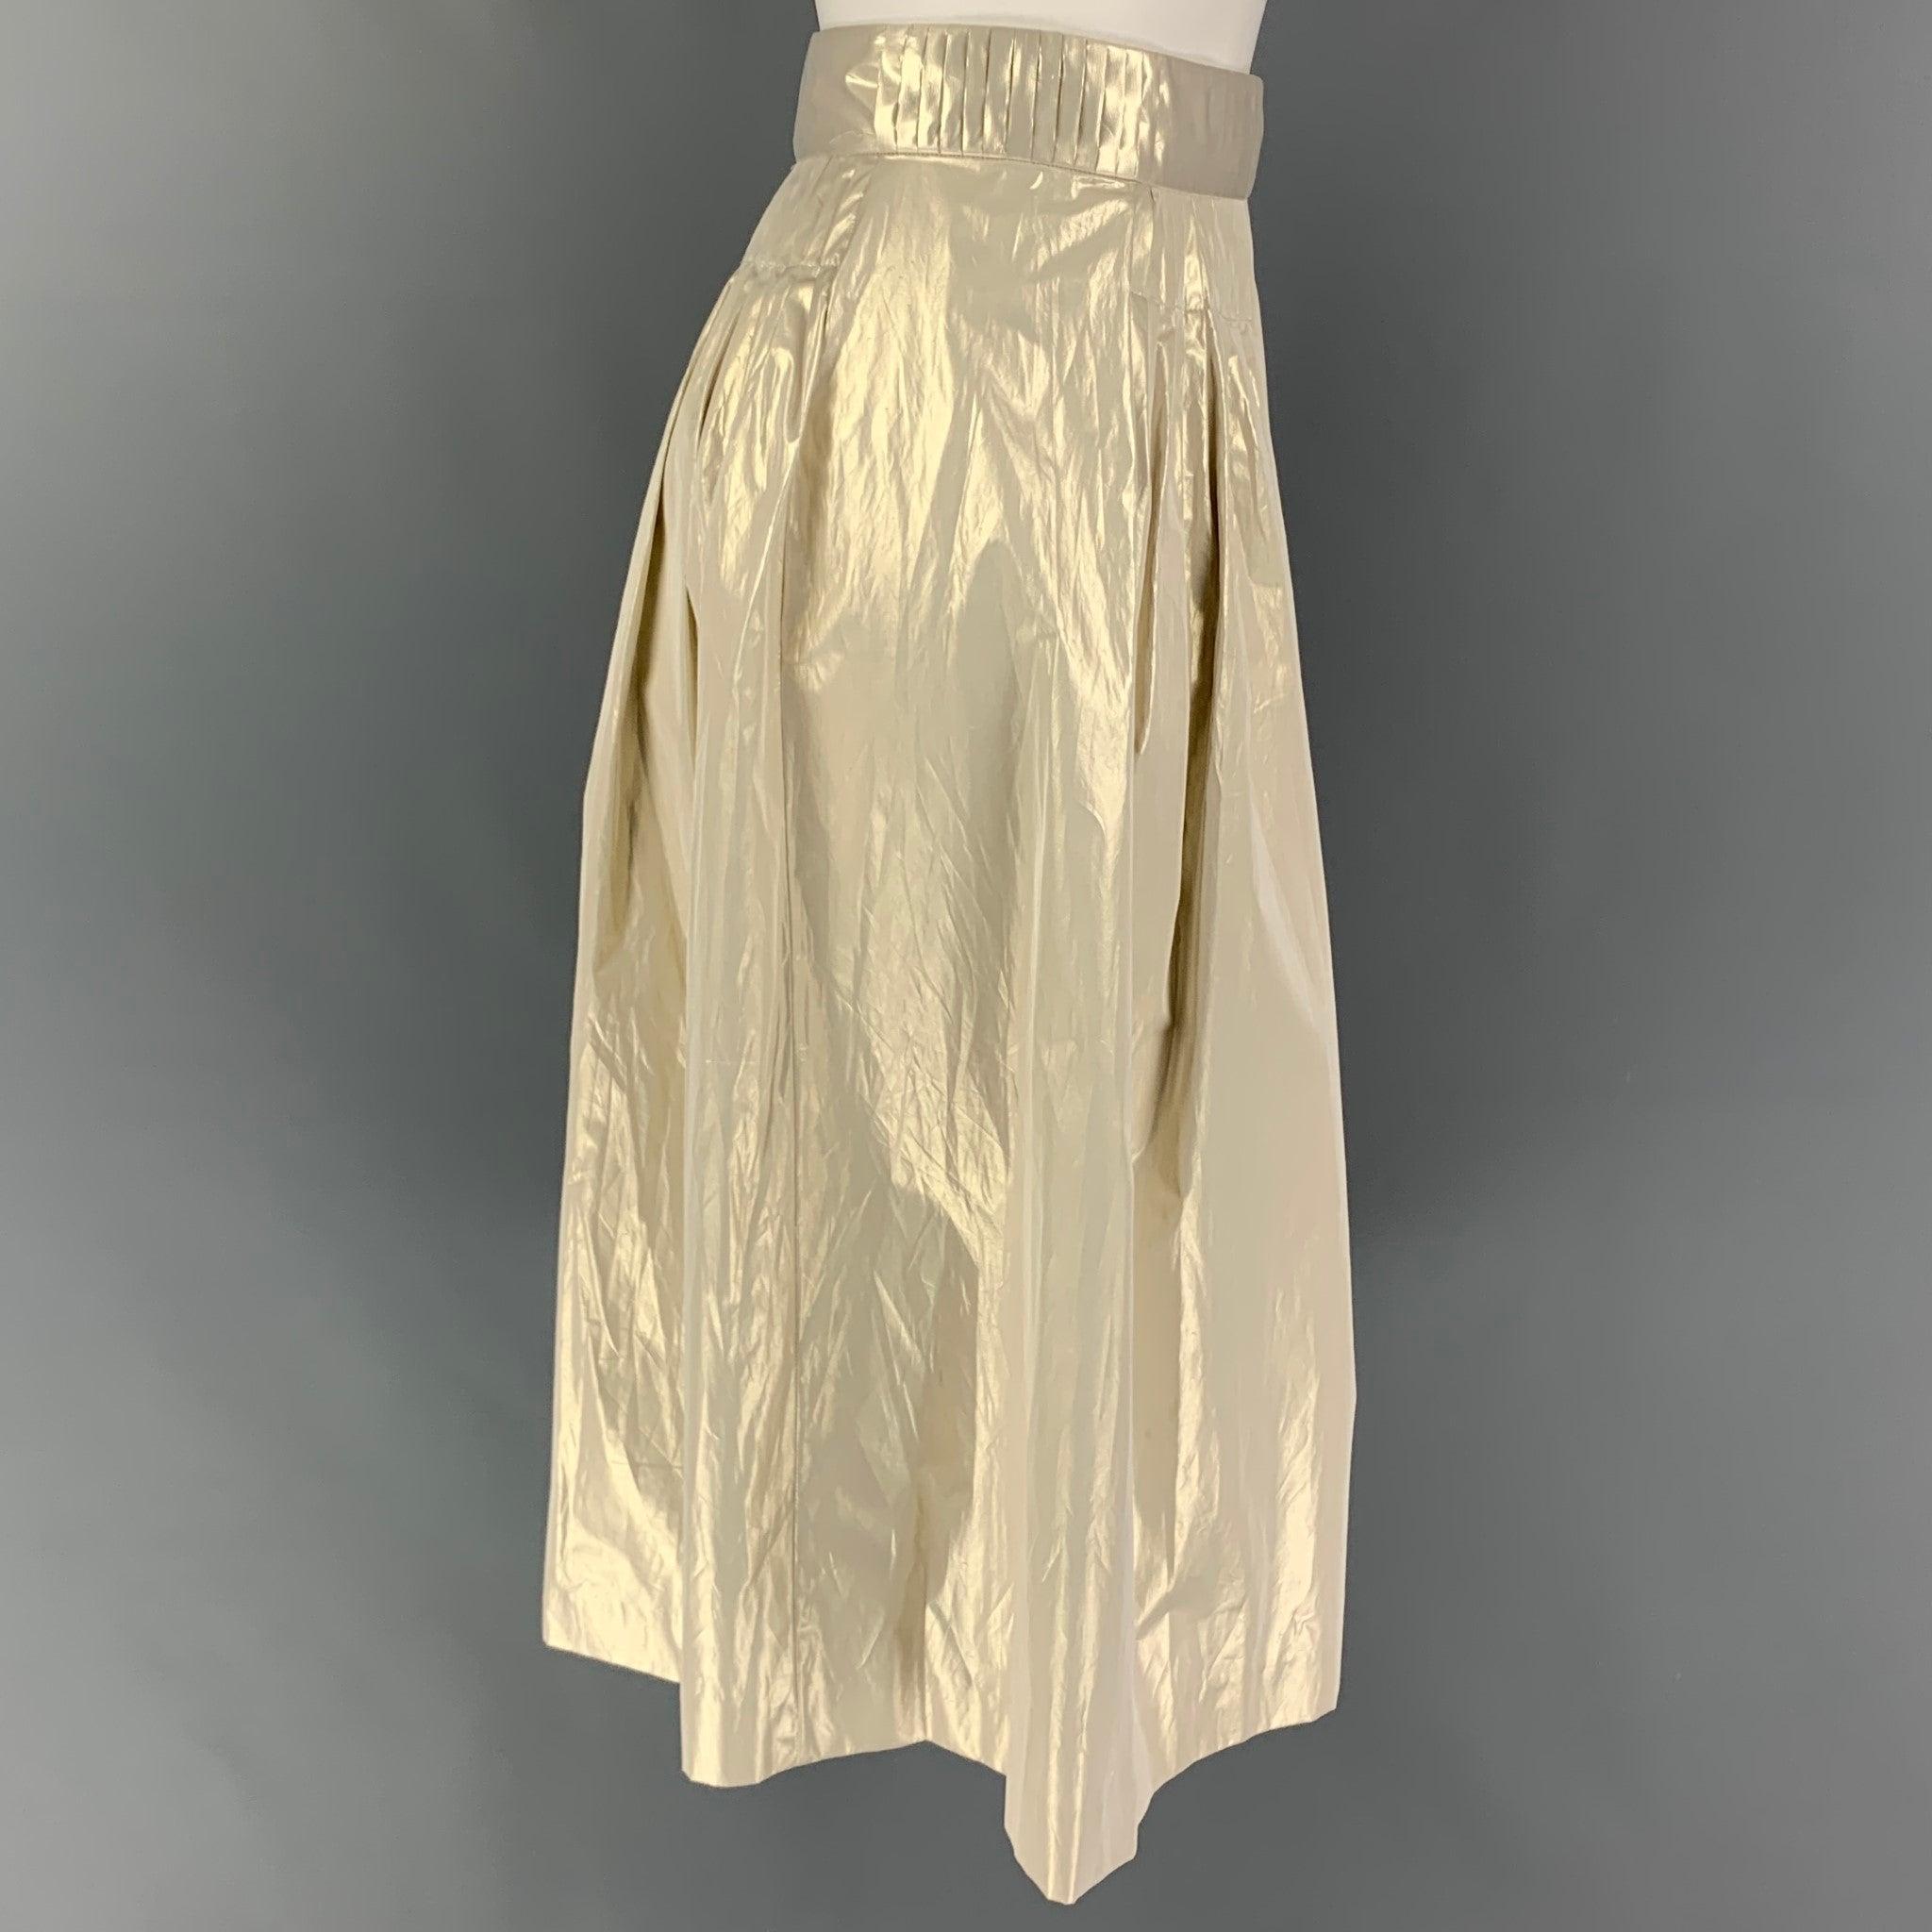 JIL SANDER skirt comes in a platinum polyester featuring a pleated style and a side zipper closure. Made in Italy.
Very Good
Pre-Owned Condition. 

Marked:   34 

Measurements: 
  Waist: 28 inches  Hip: 38 inches  Length: 26 inches 
  
  
